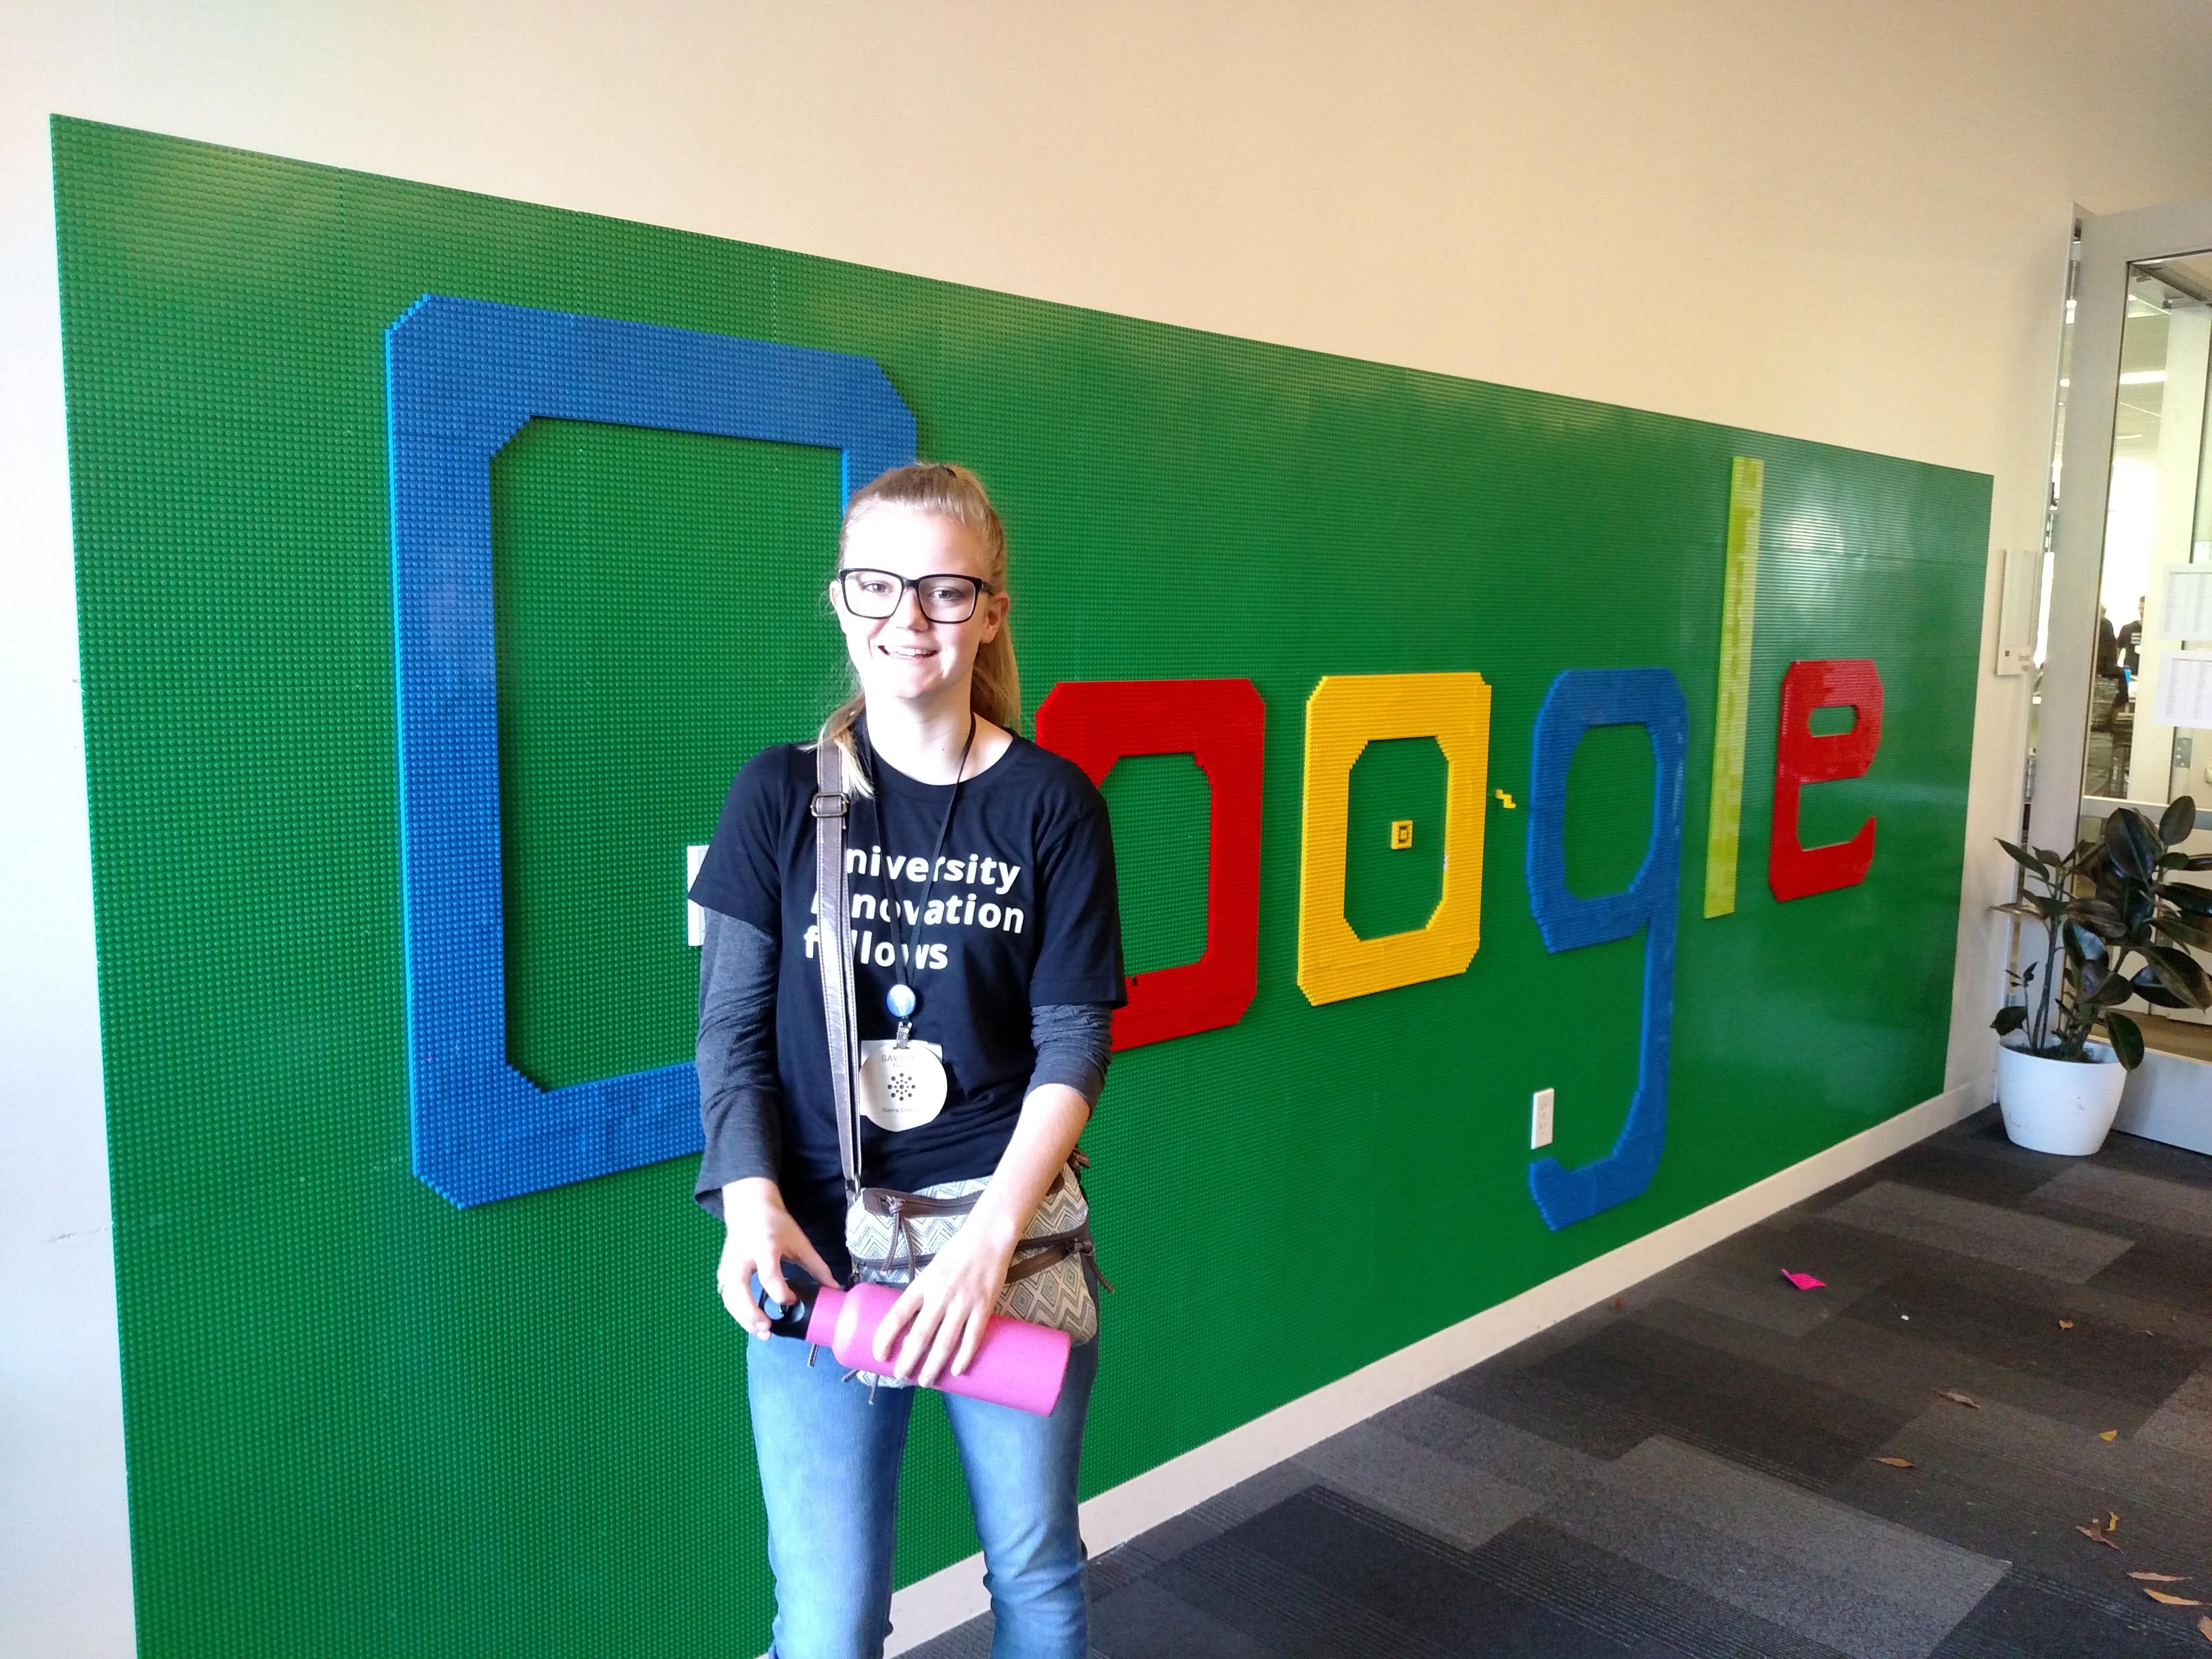 Savanna Turner, Sierra College Engineering student, visited Google with the University Innovation Fellows for training in collaboration and team building.